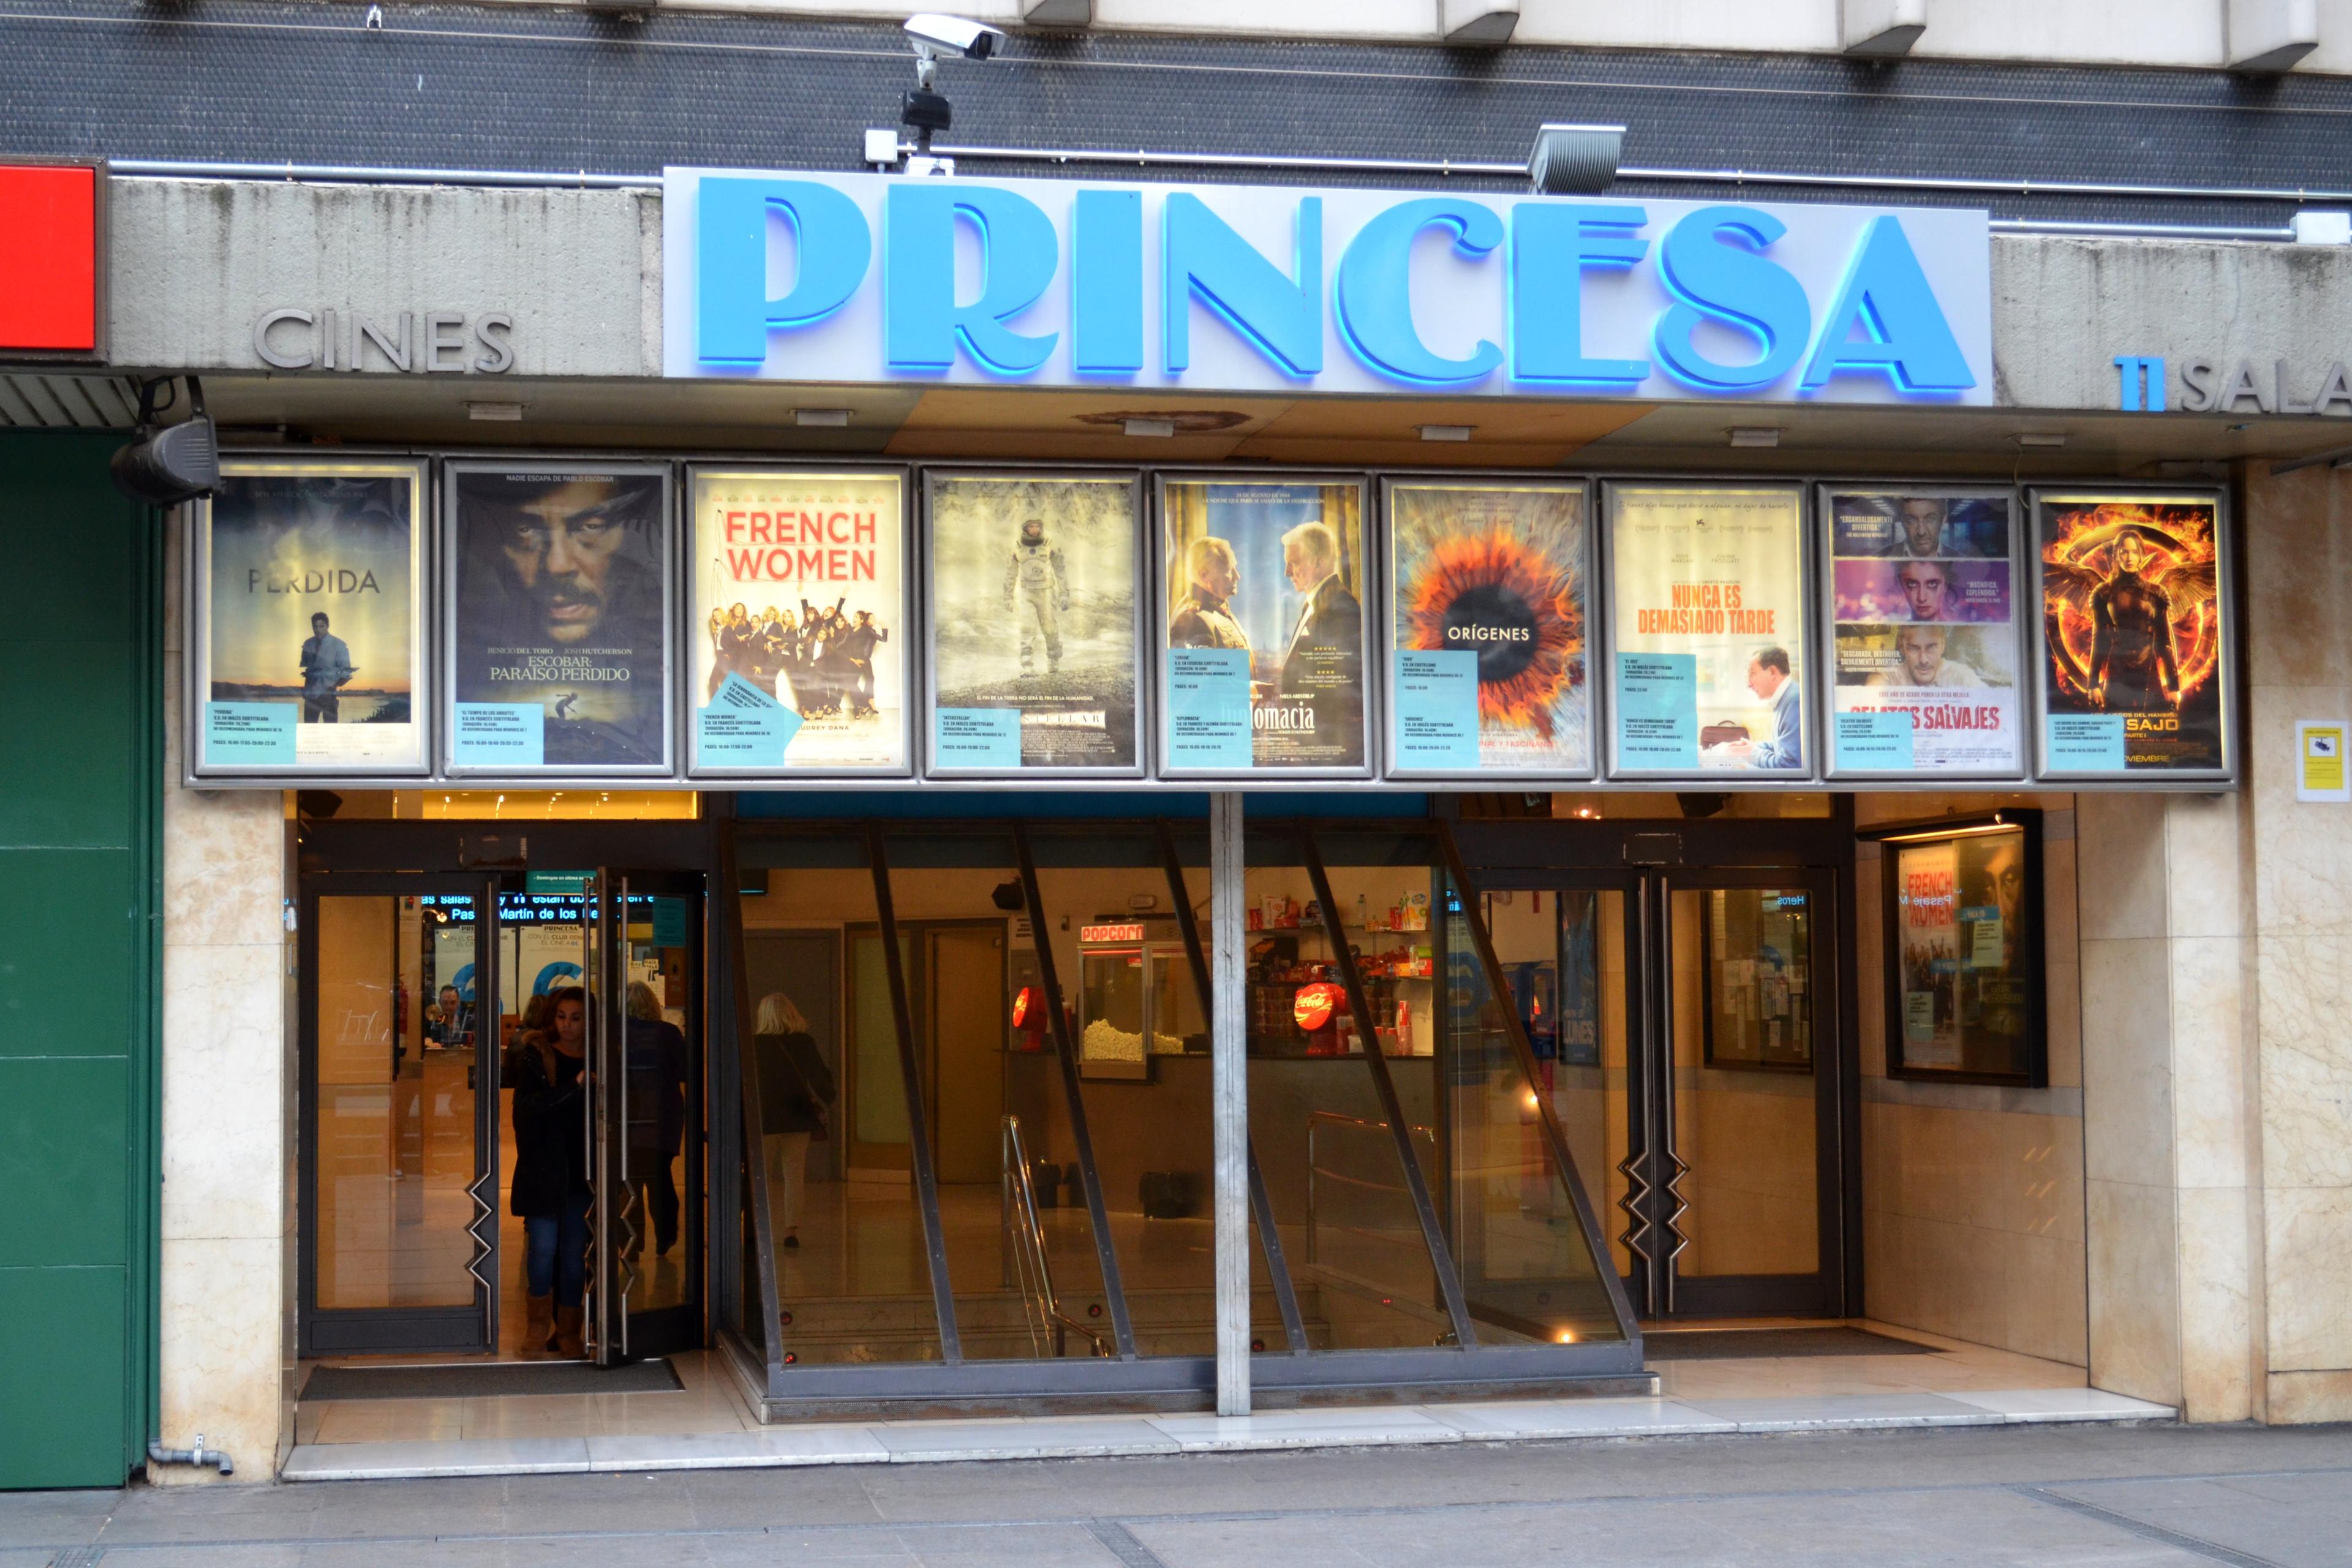 Cover image of this place Cines Princesa